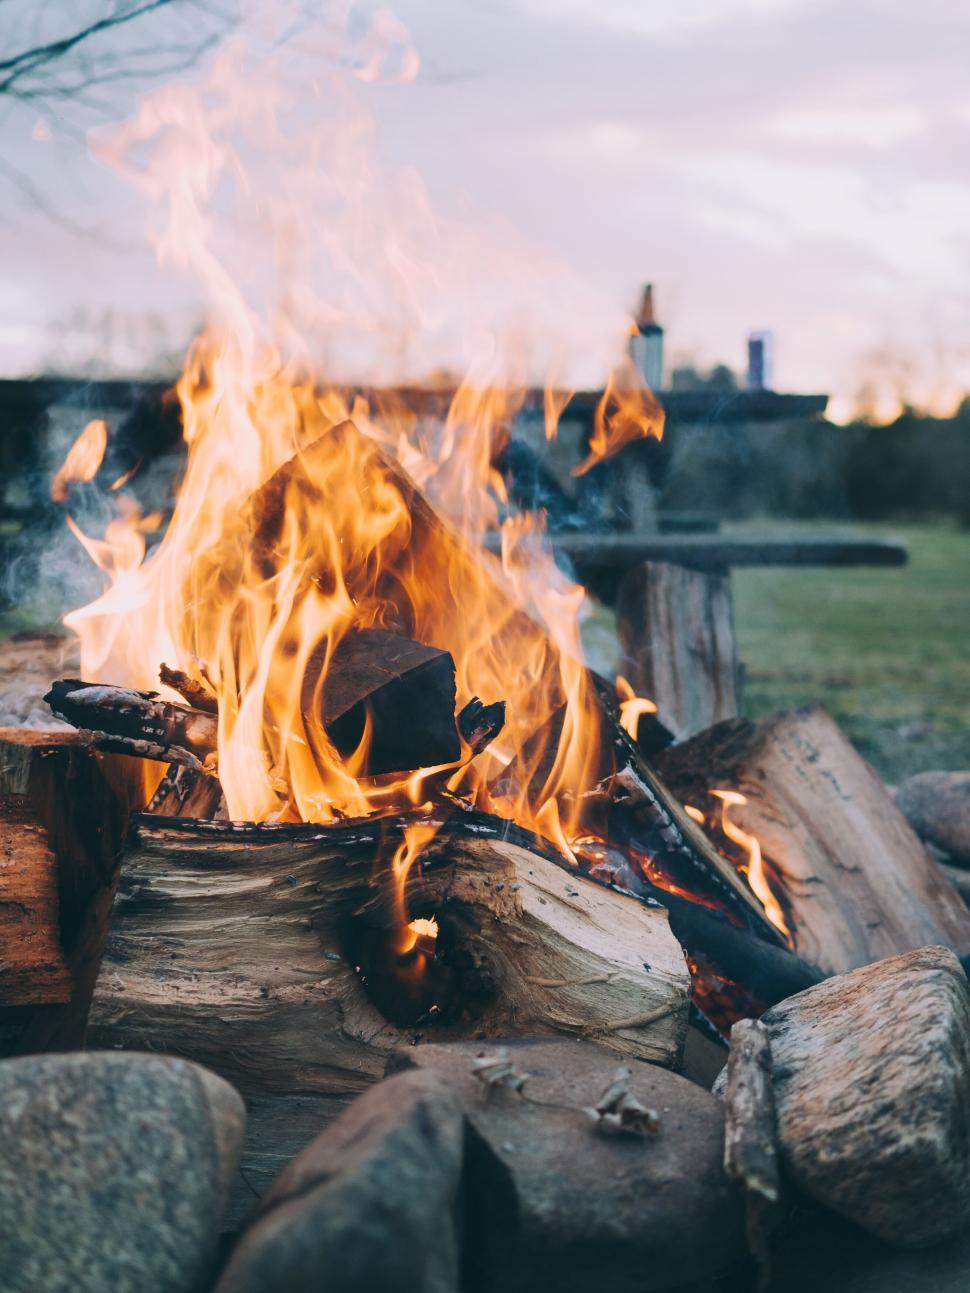 Free Image of Crackling campfire with rocks and wood logs 